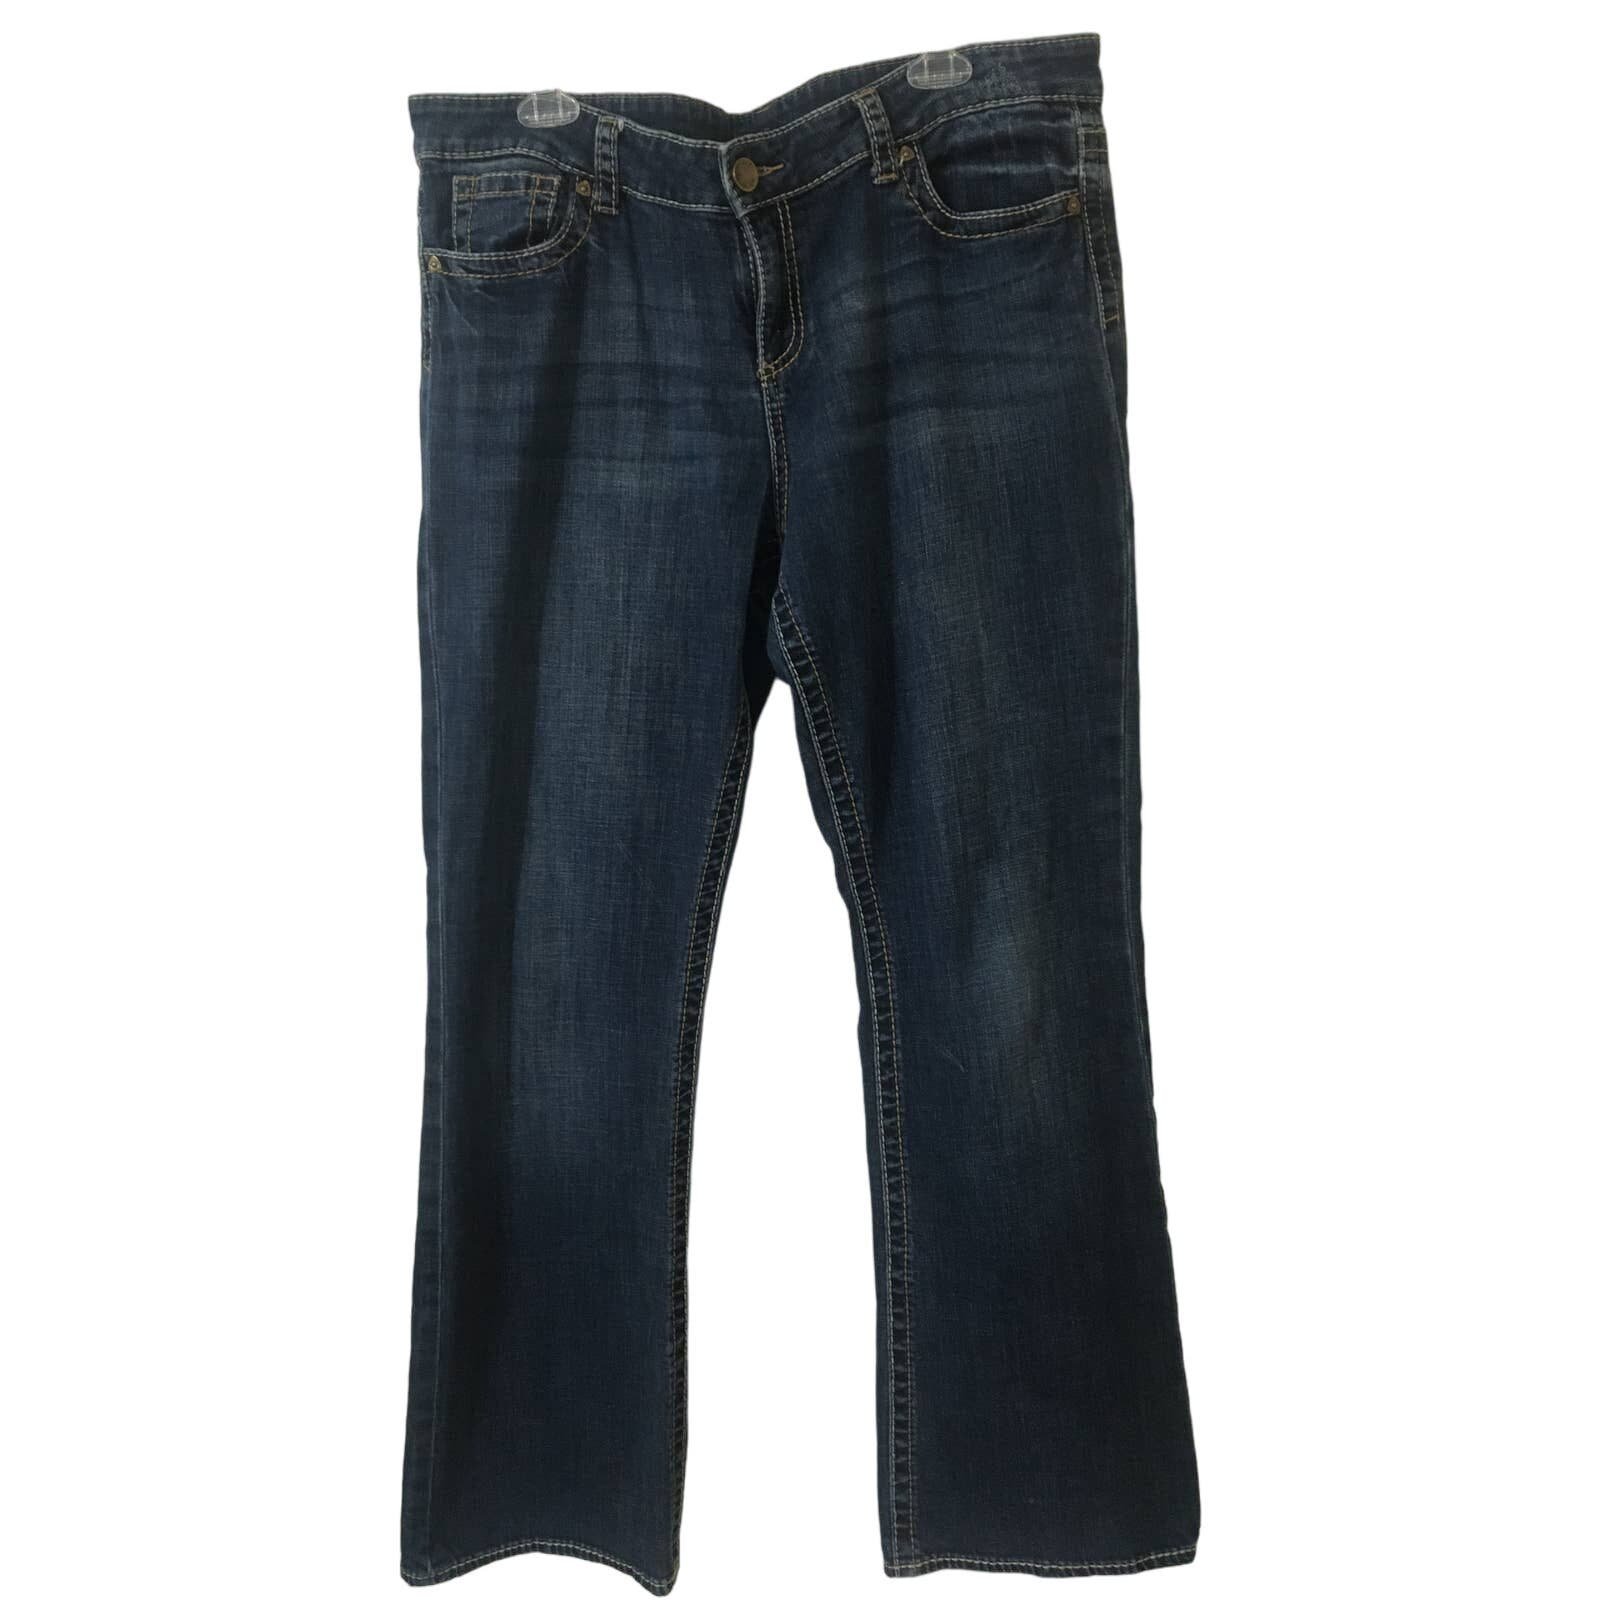 good price KUT from the Kloth Size 16 Boot Cut Jeans kc